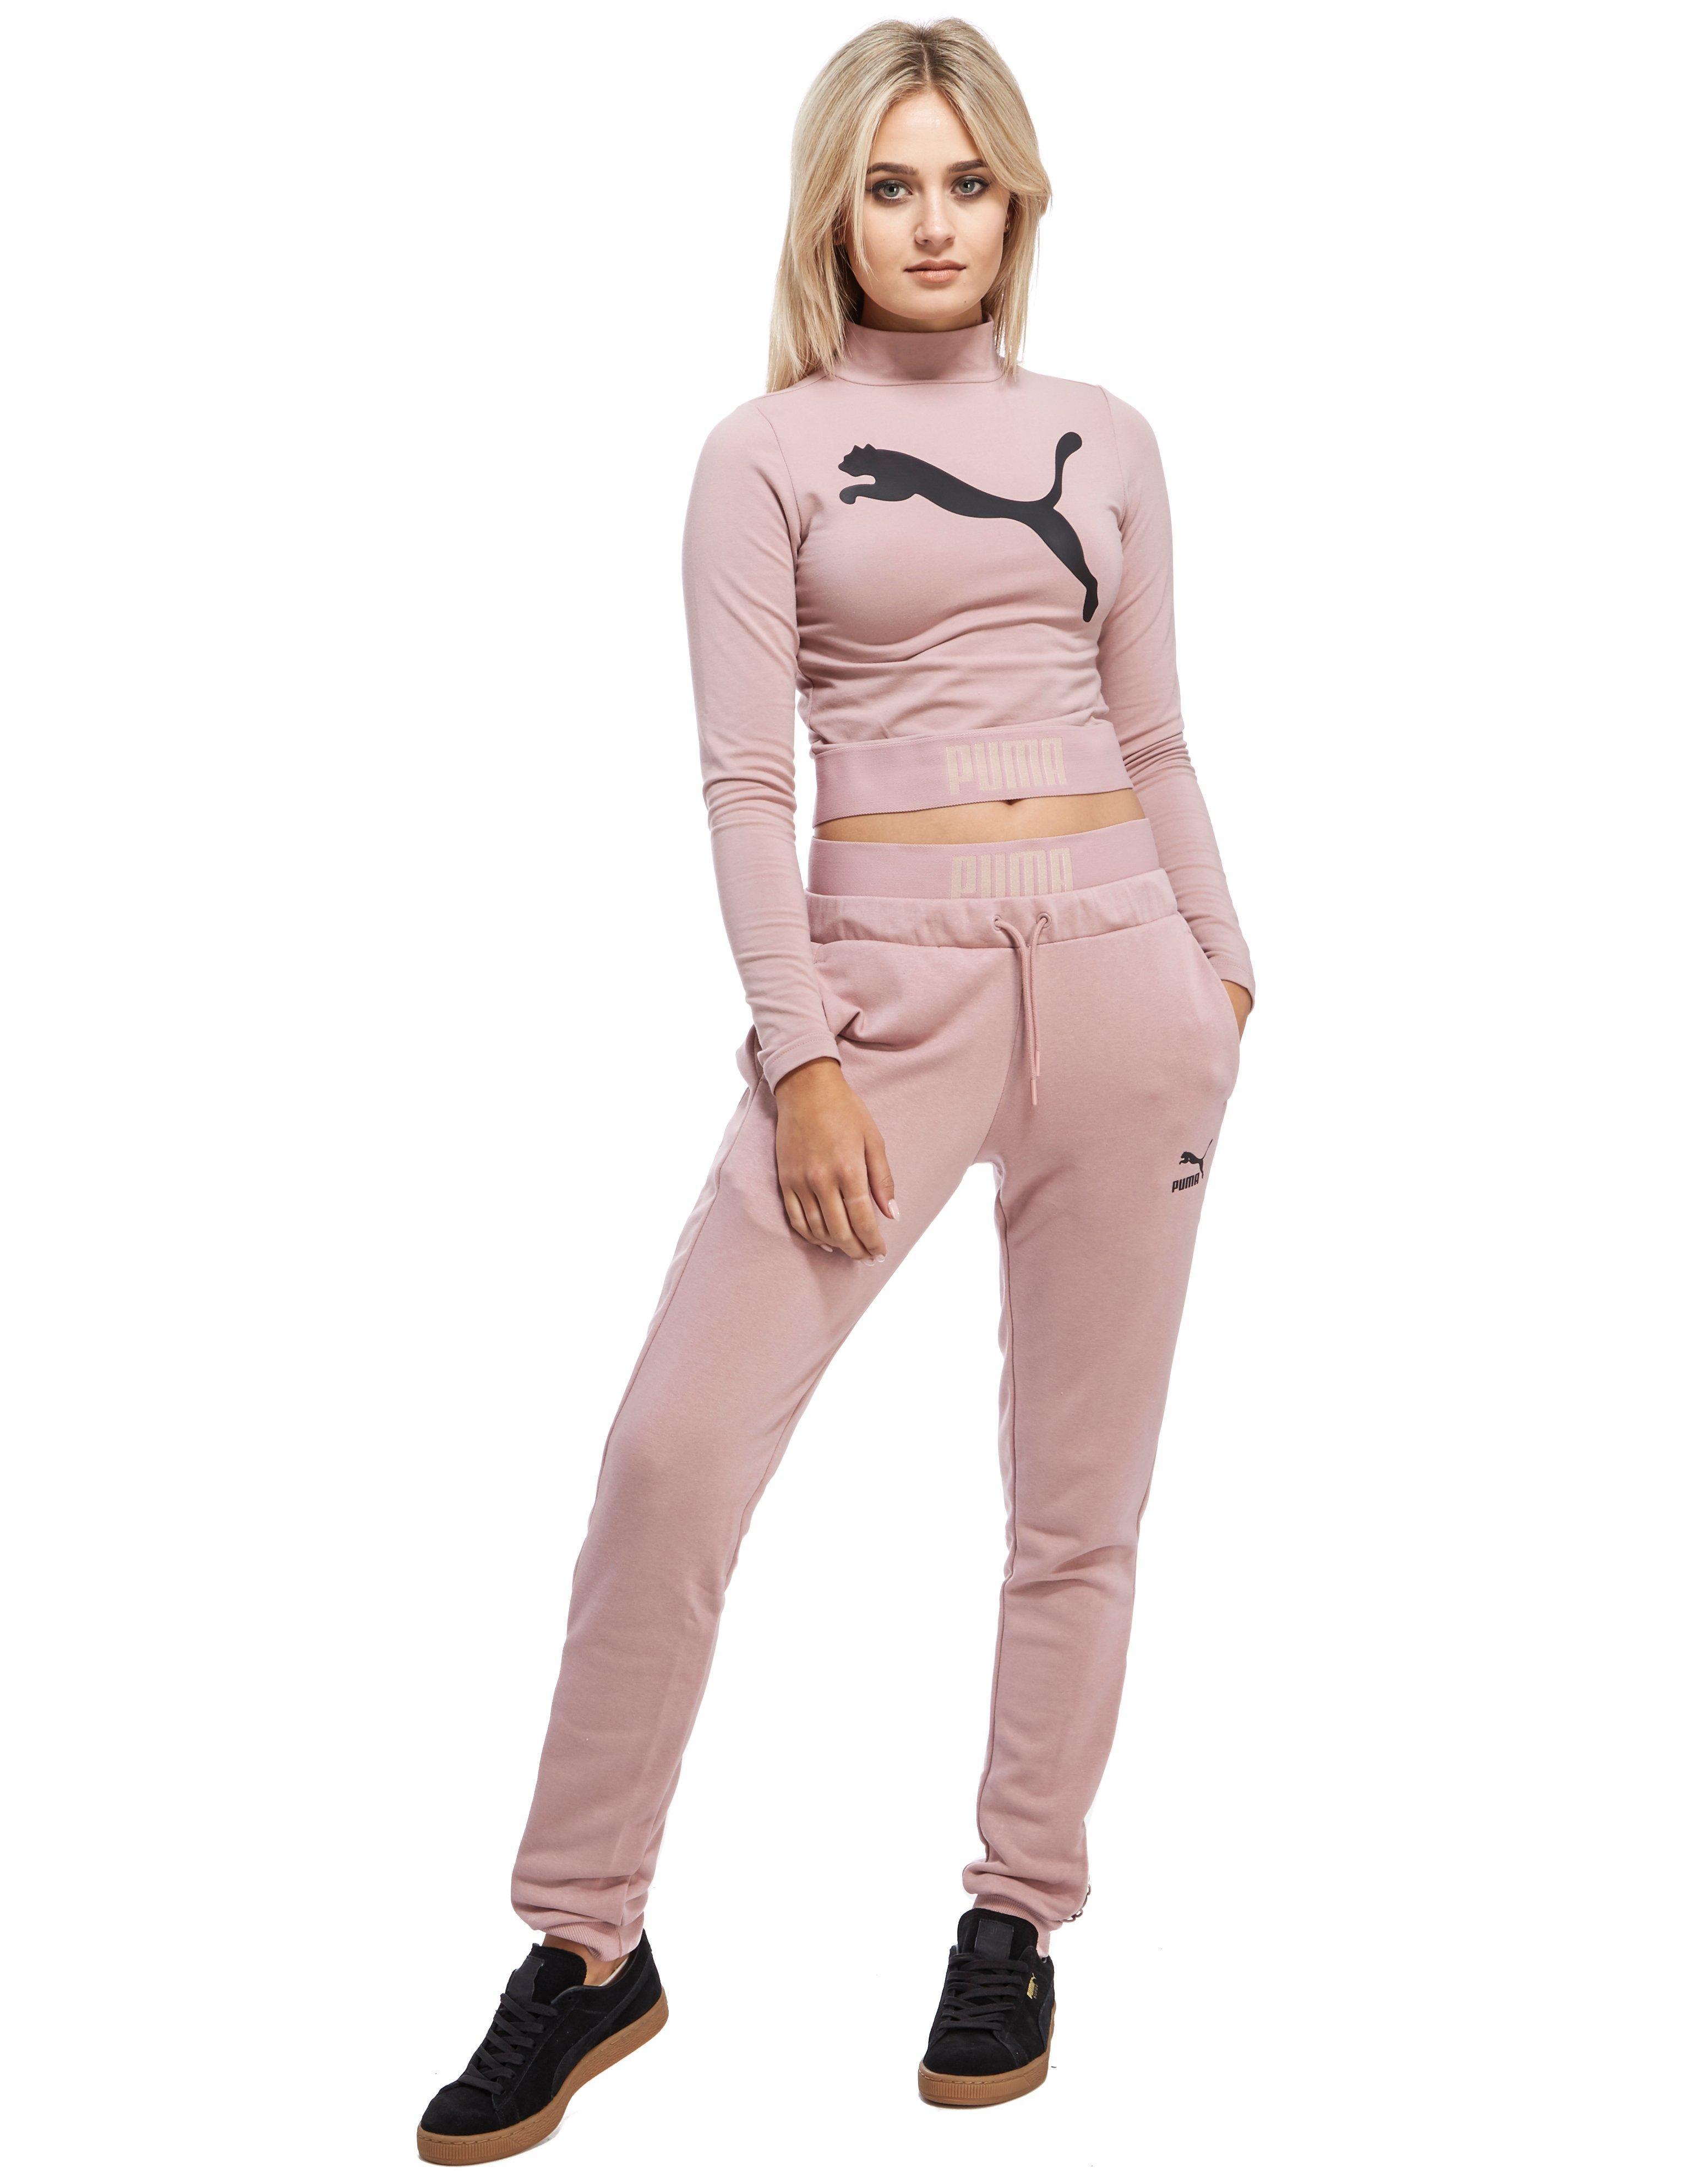 PUMA Cotton High Neck Long-sleeved Crop Top in Rose (Pink) - Lyst